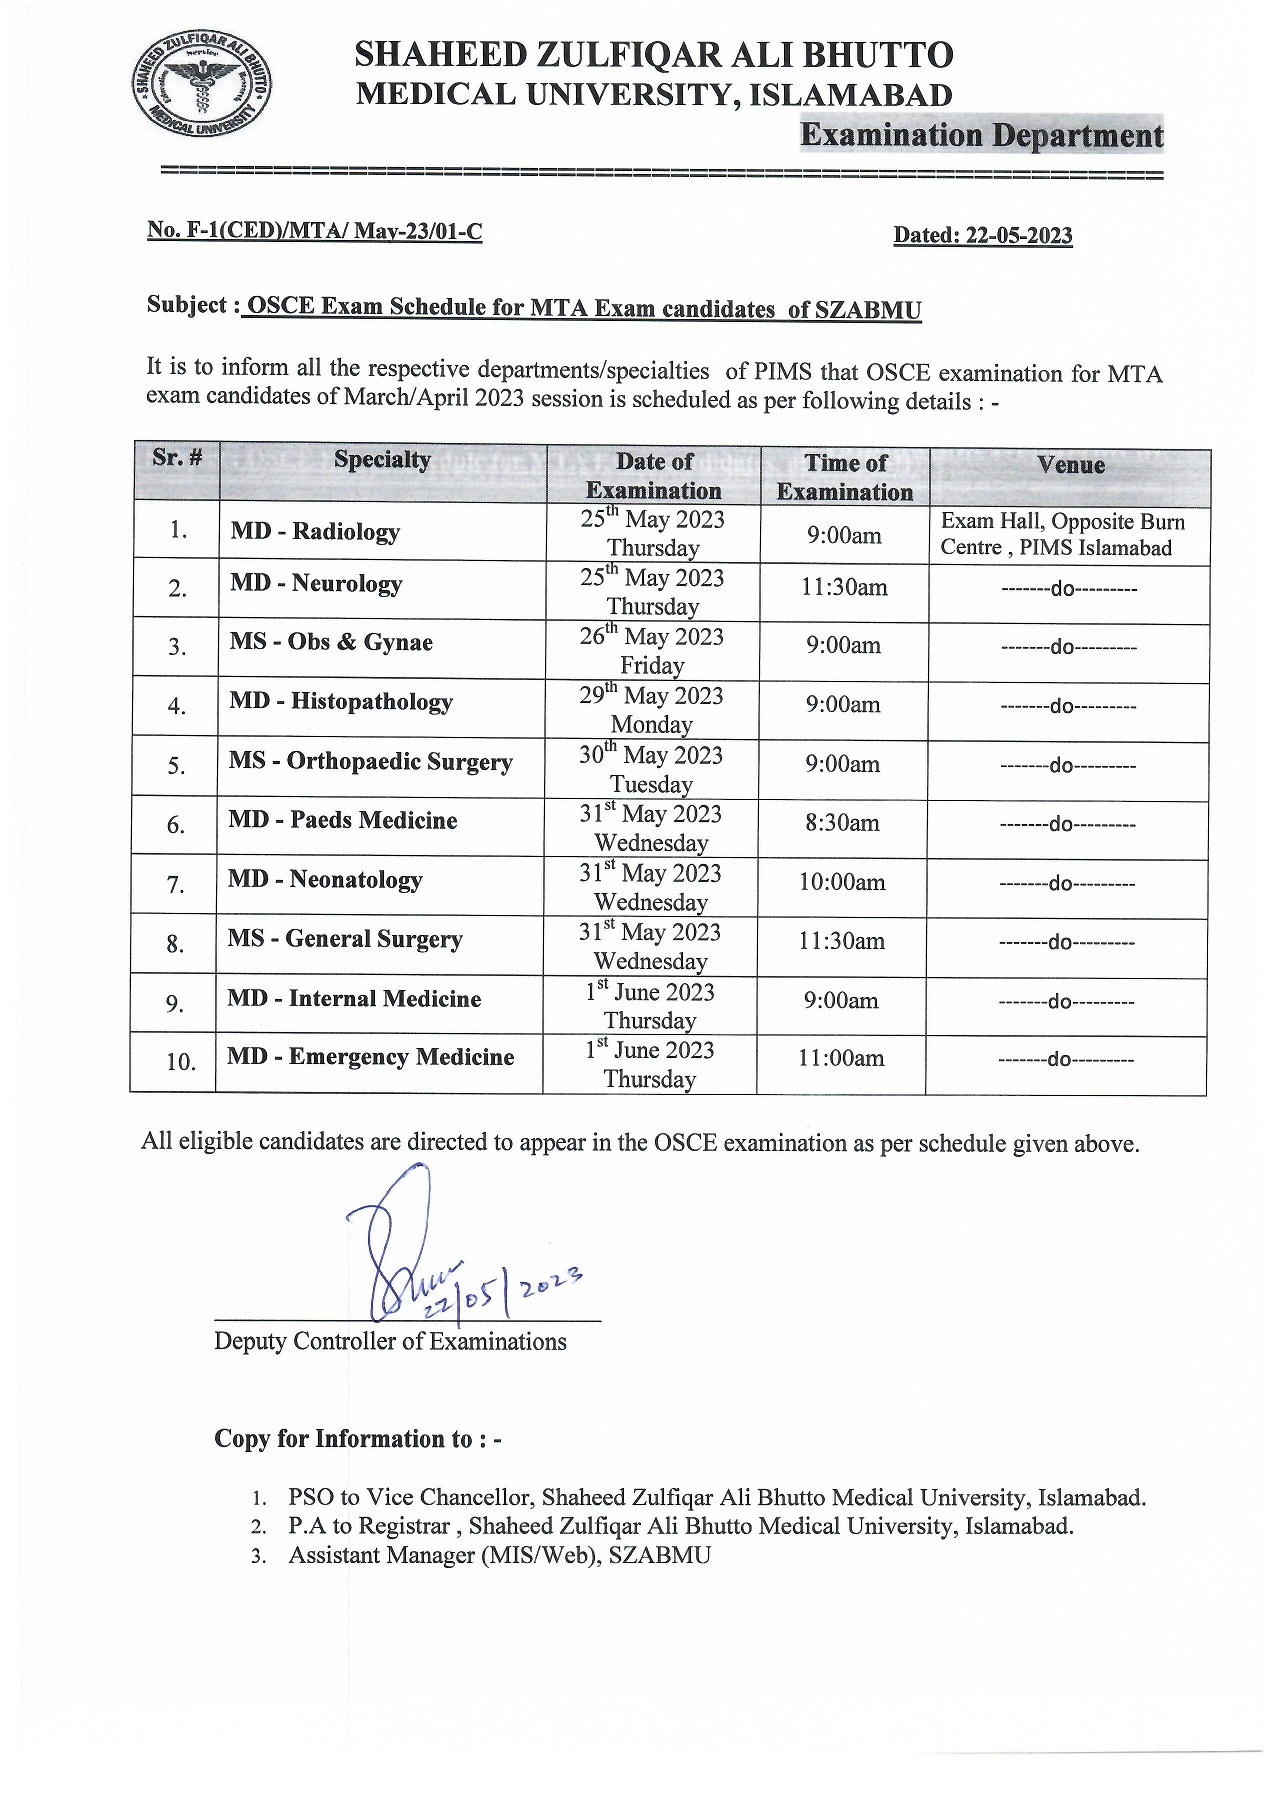 Schedule of OSCE Examination for MTA Candidates of MS,MD,MDS March/April Session 2023